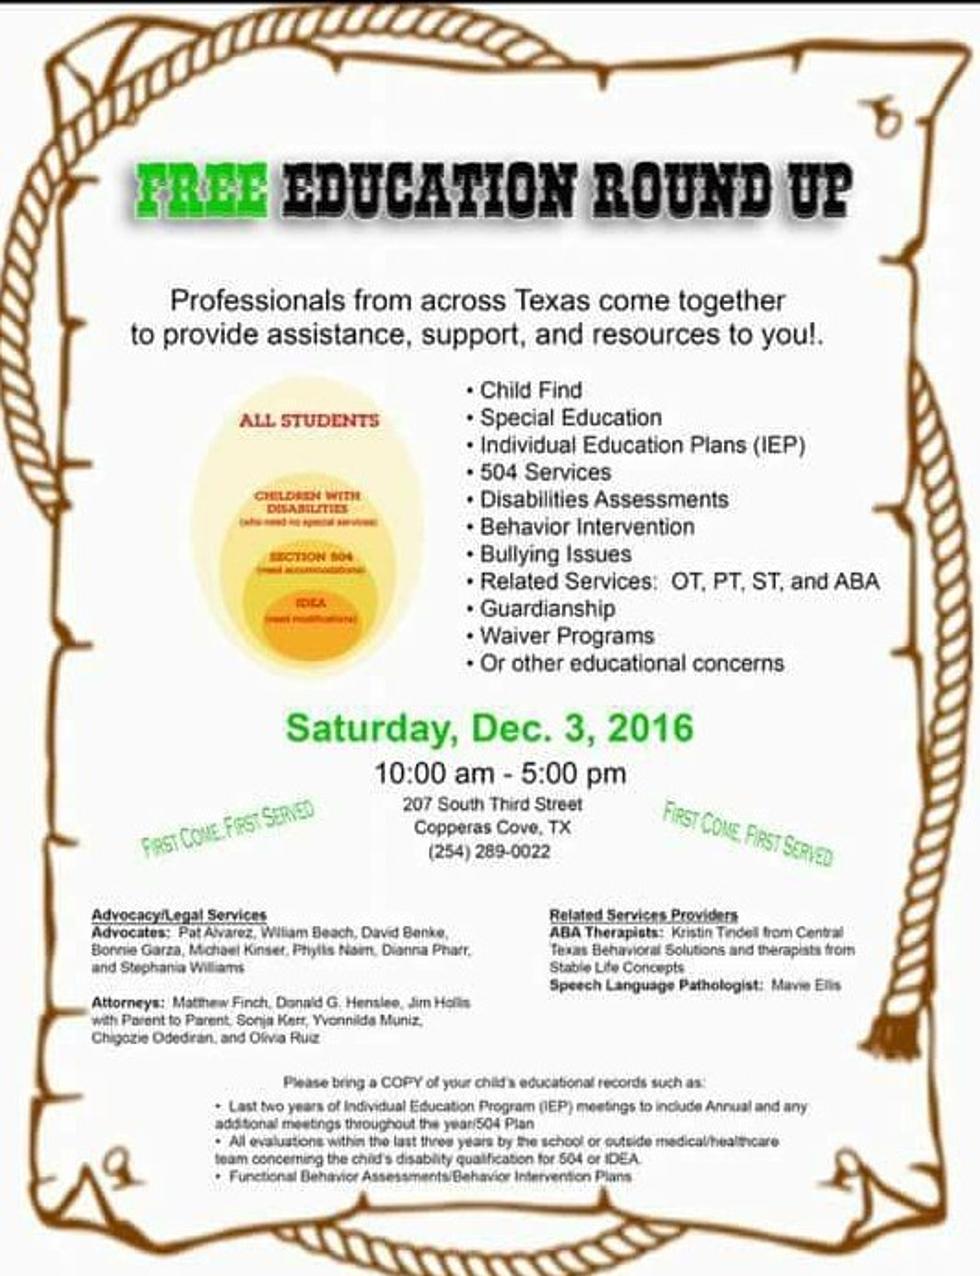 Free Education Round-Up In Copperas Cove